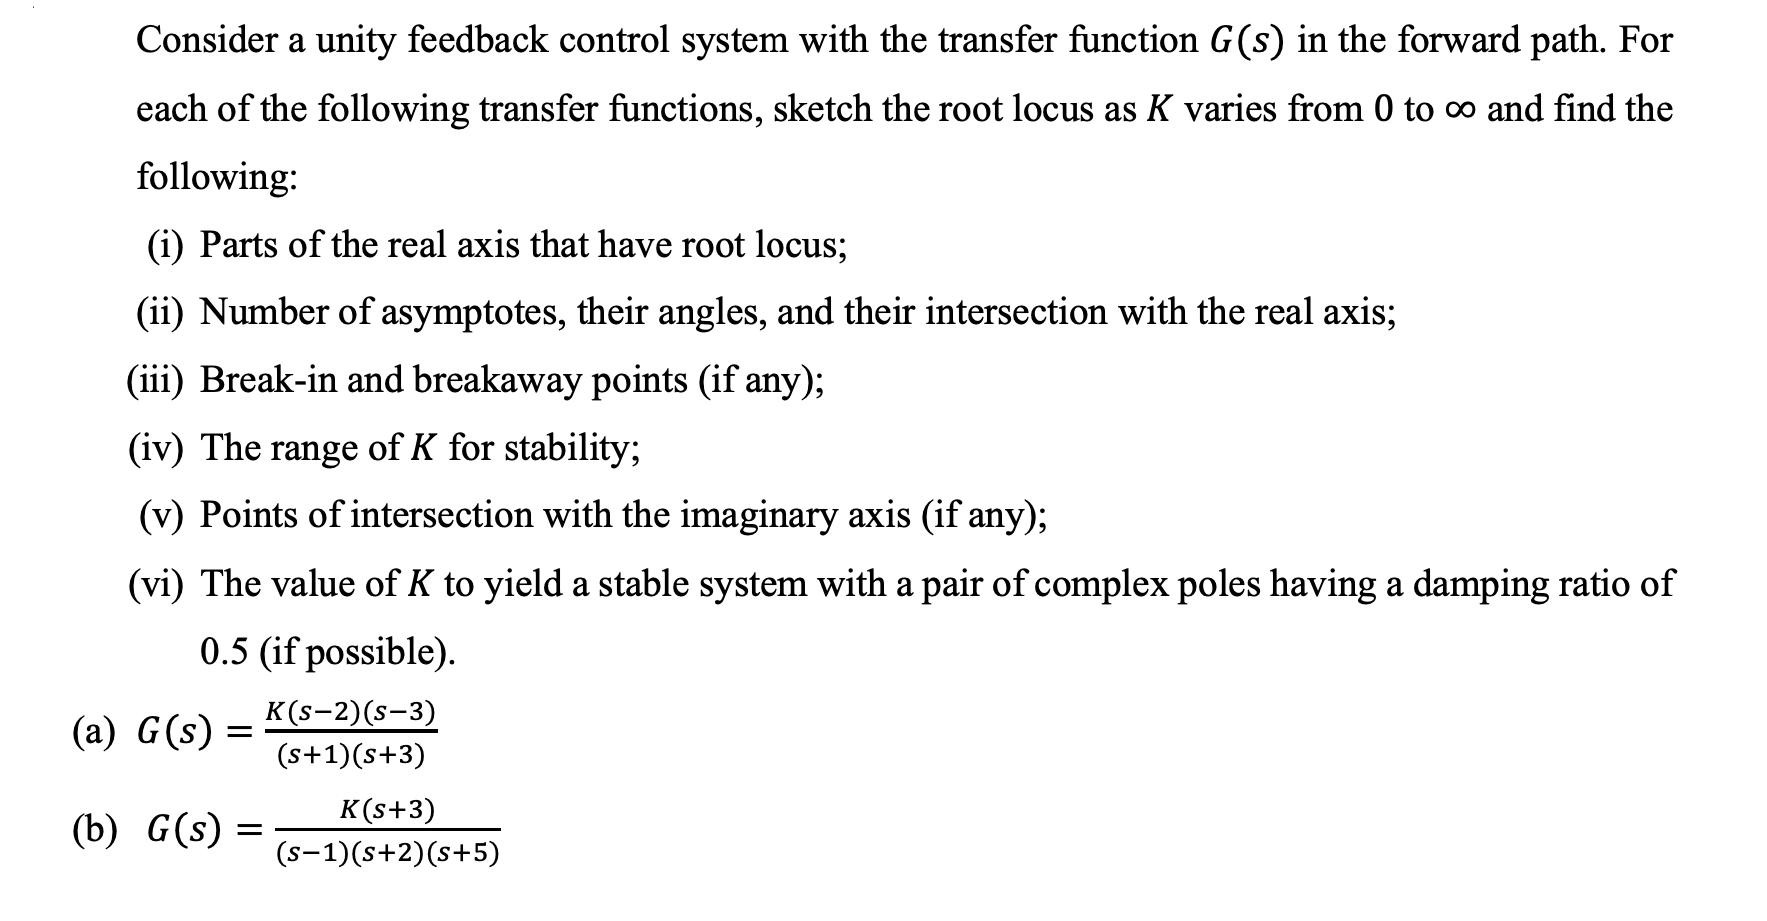 Consider a unity feedback control system with the transfer function G(s) in the forward path. For each of the